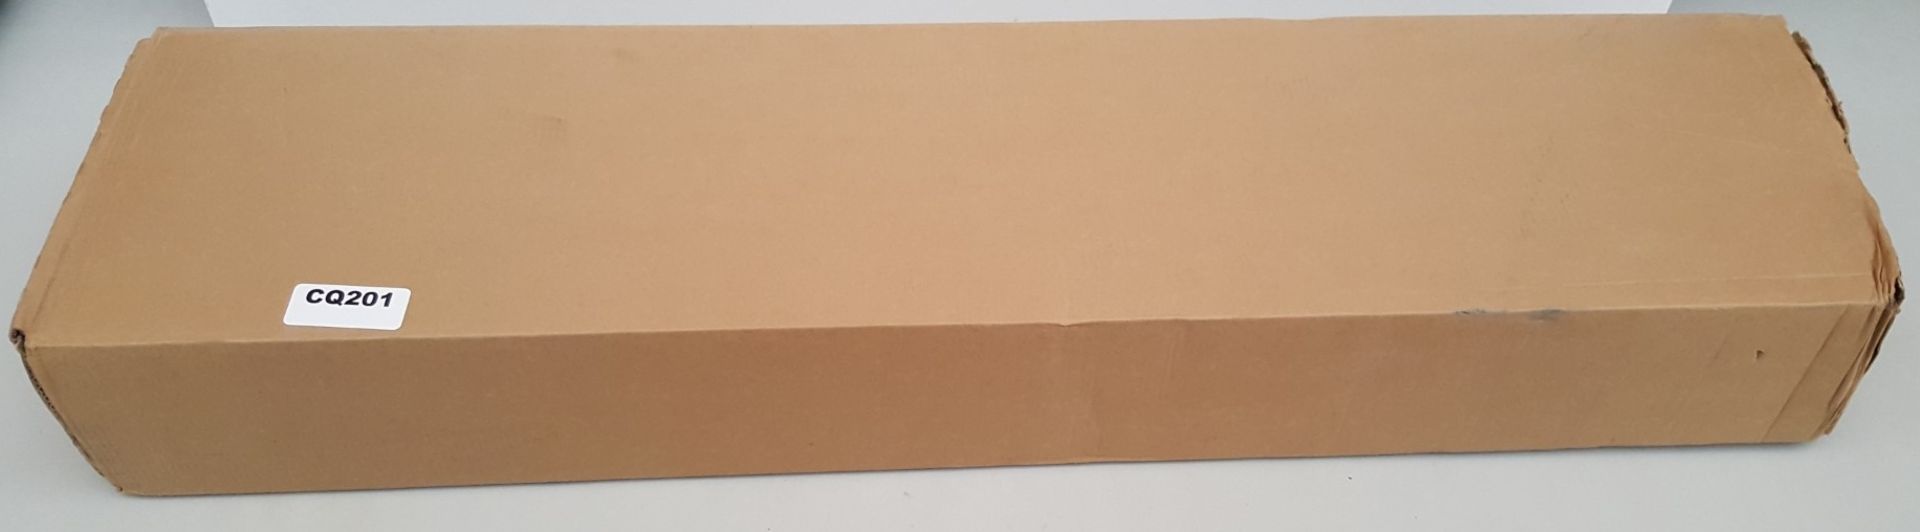 1 x Uncoated Mono/Colour Inkjet Paper Roll 841mm x 45m 80gsm Box Of 2 - Ref CA201 - CL011 - Location - Image 2 of 4